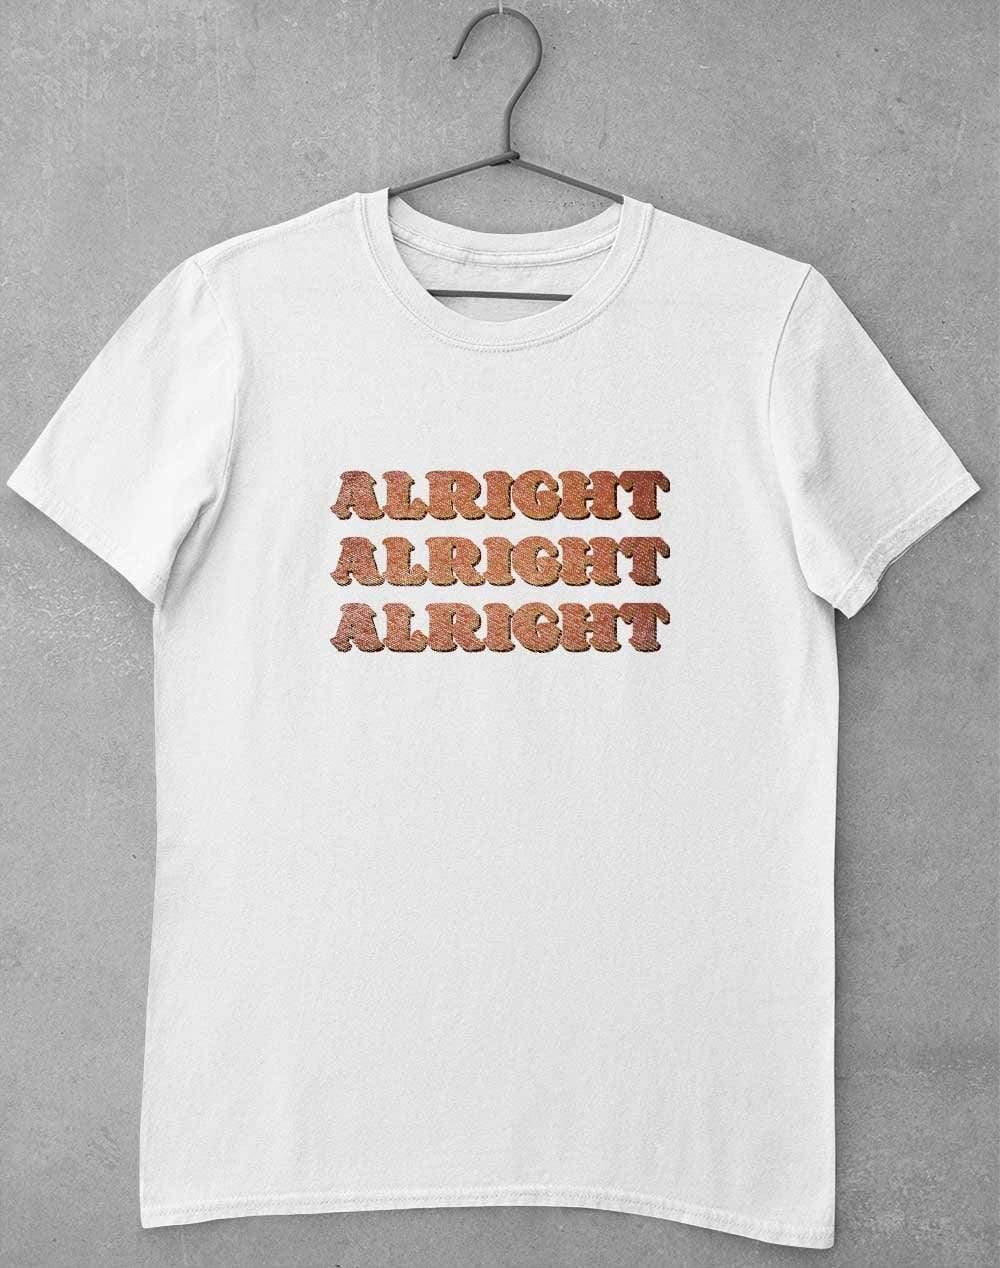 Alright Alright Alright T-Shirt S / White  - Off World Tees